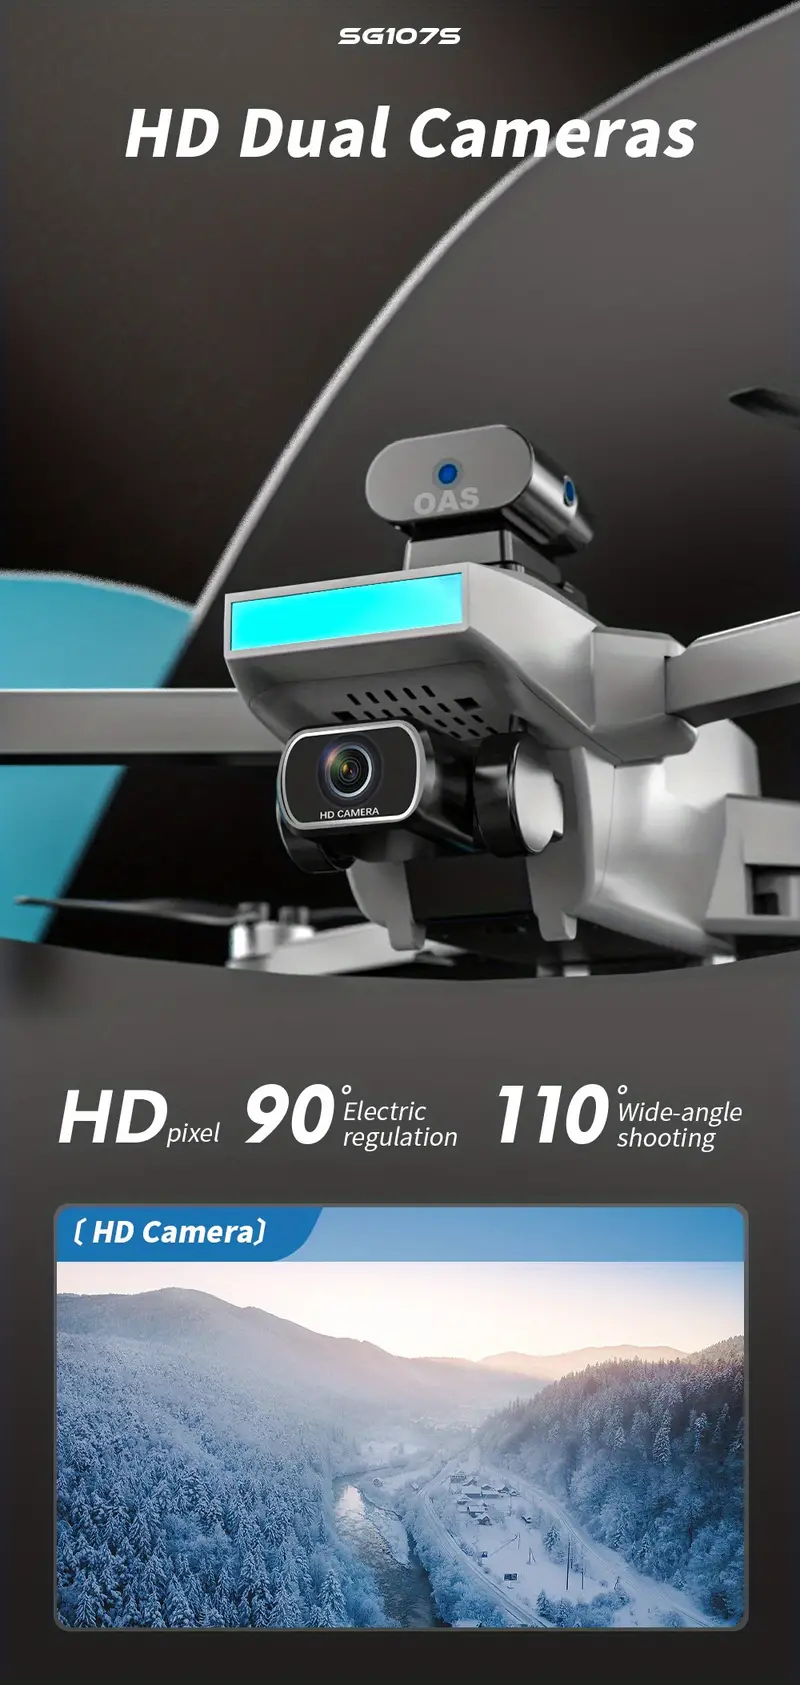 sg107s drone 4k dual cameras obstacle avoidance 20 min flight time carrying bag perfect for beginners details 3